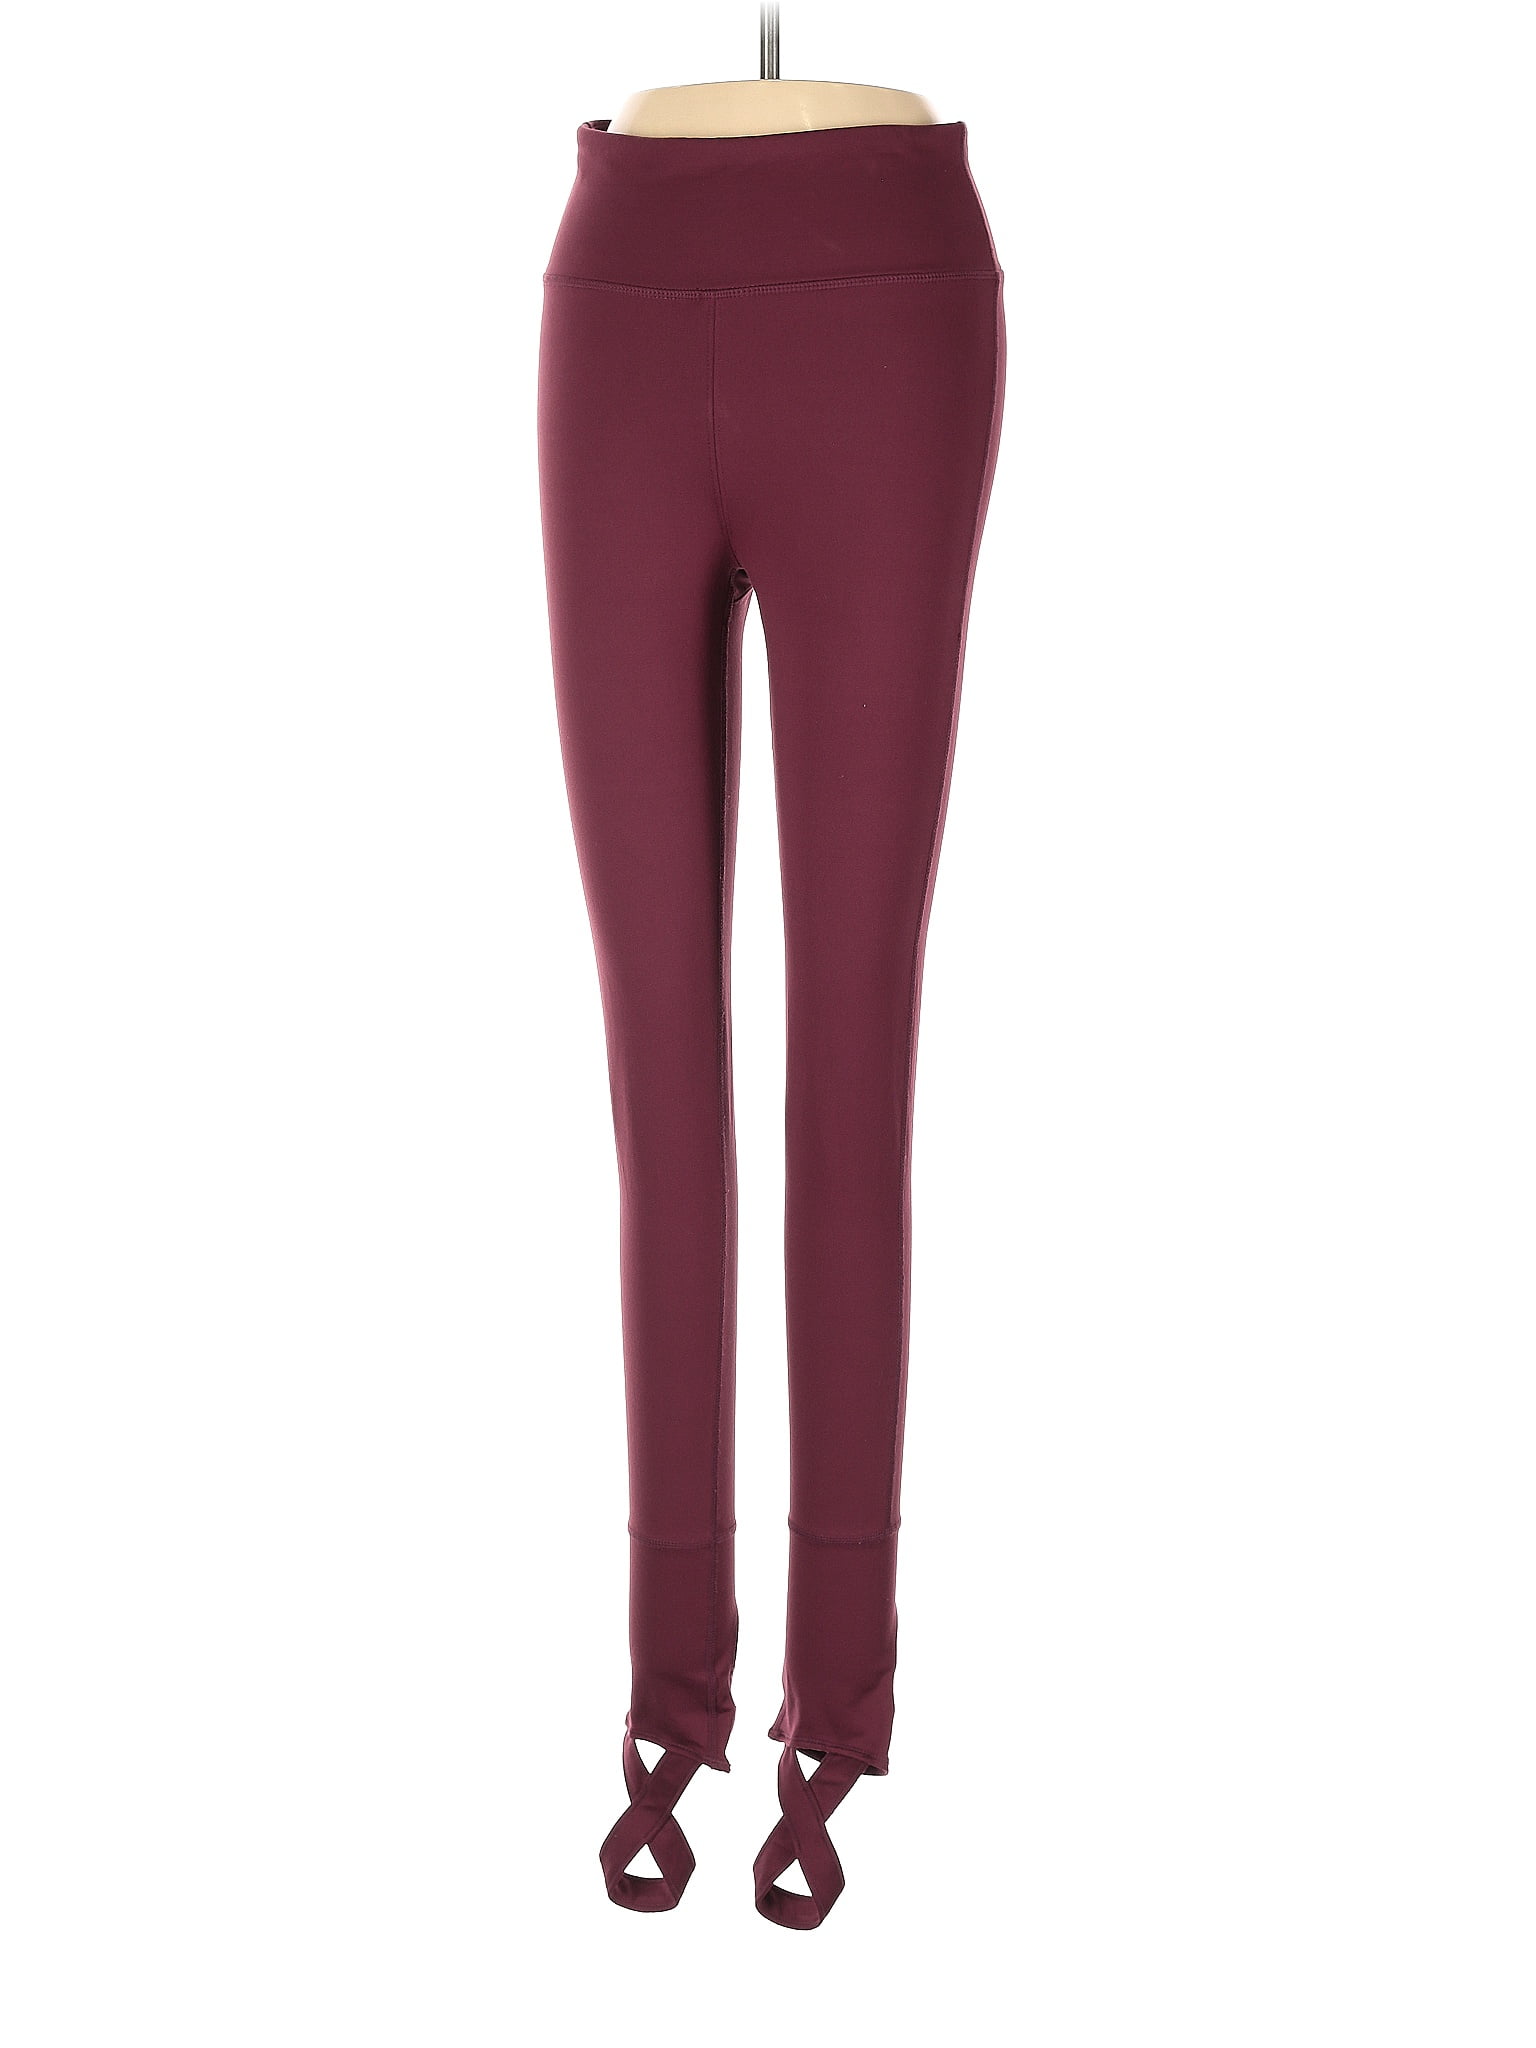 Zyia Active Solid Red Leggings Size 2 - 47% off